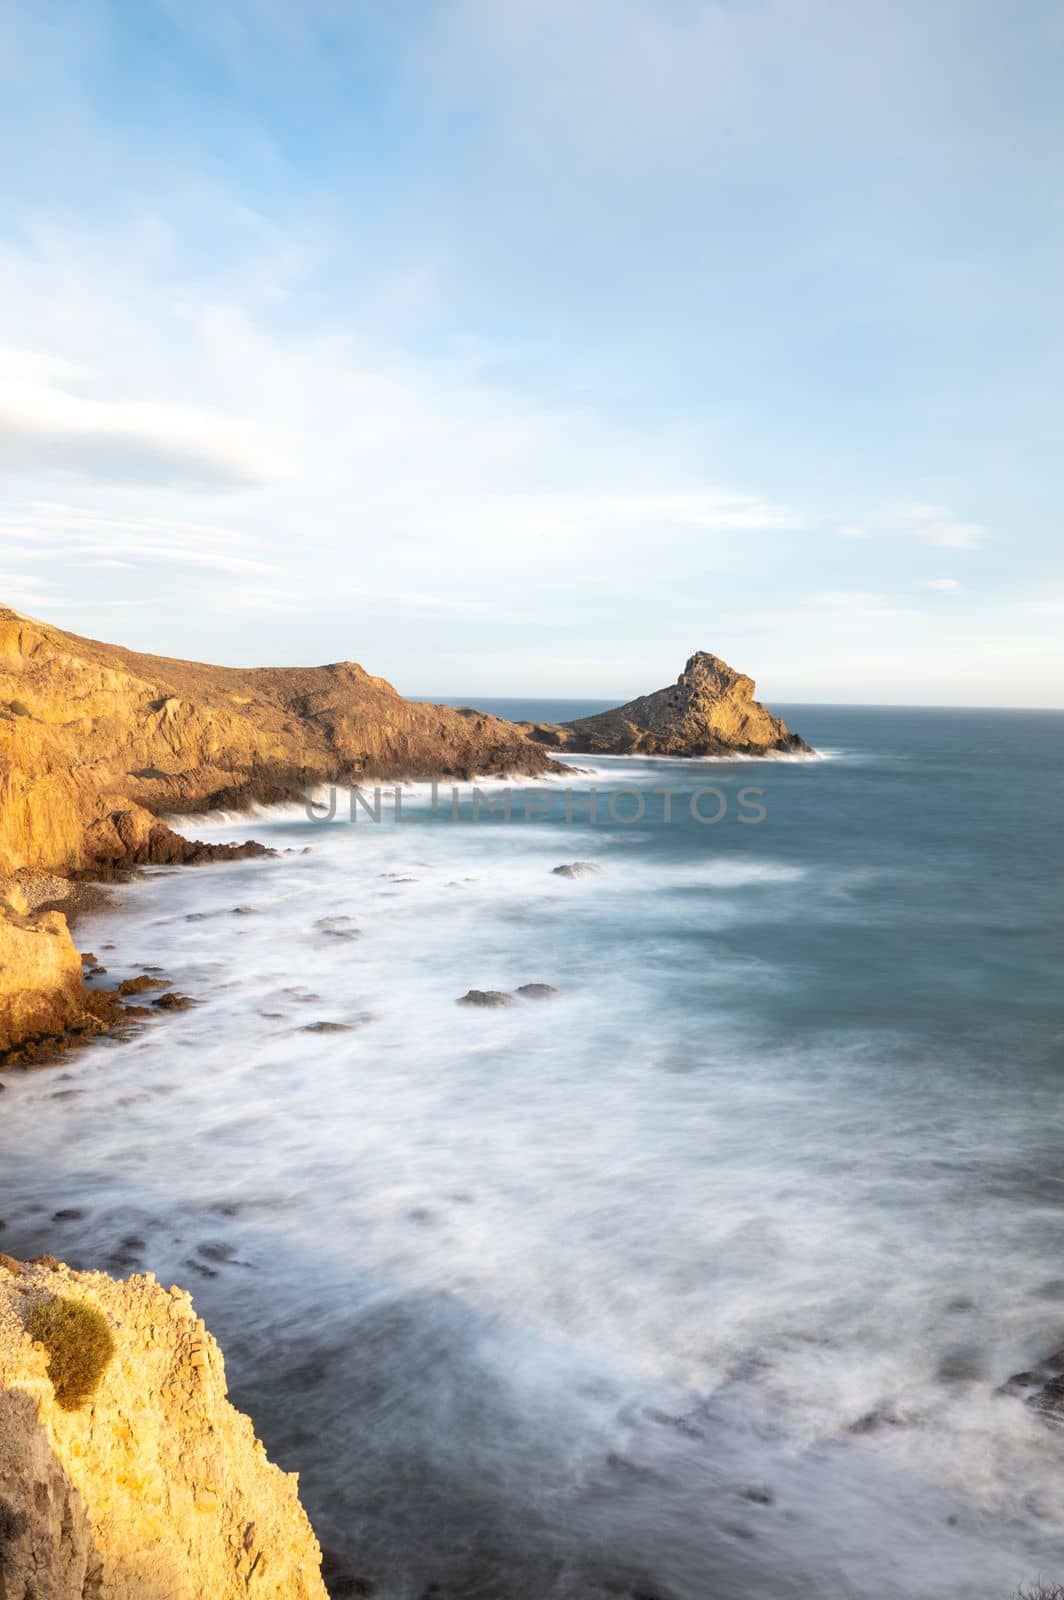 The Natural Maritime-Terrestrial Park of Cabo de Gata-Níjar is a Spanish protected natural area located in the province of Almería, Andalusia. by martinscphoto